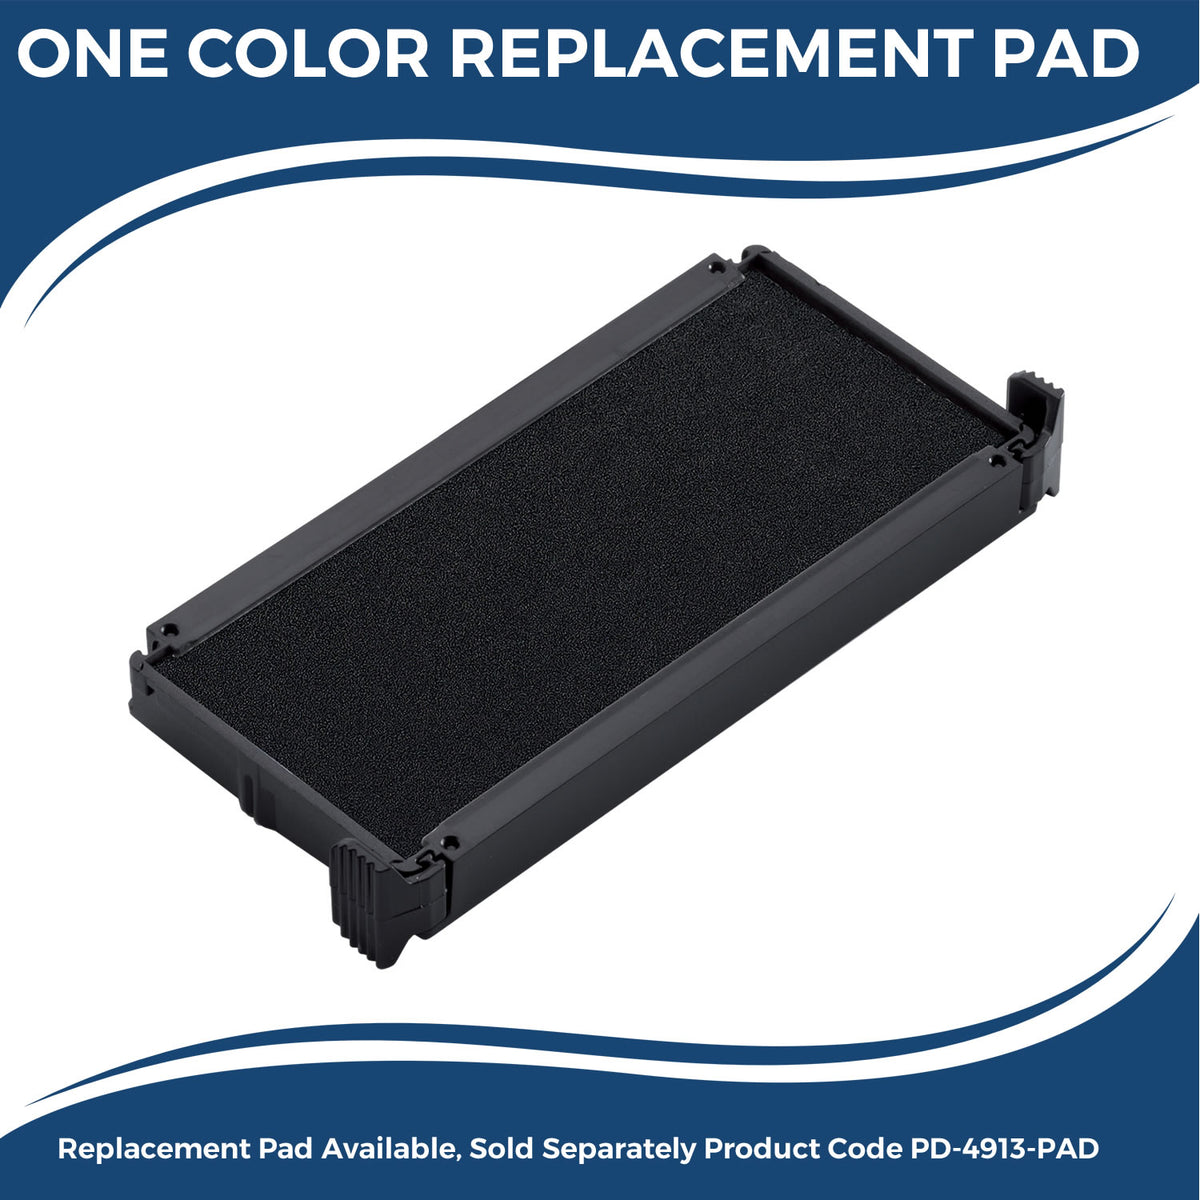 Large Self Inking Disclosures Stamp 4557S Large Replacment Pad